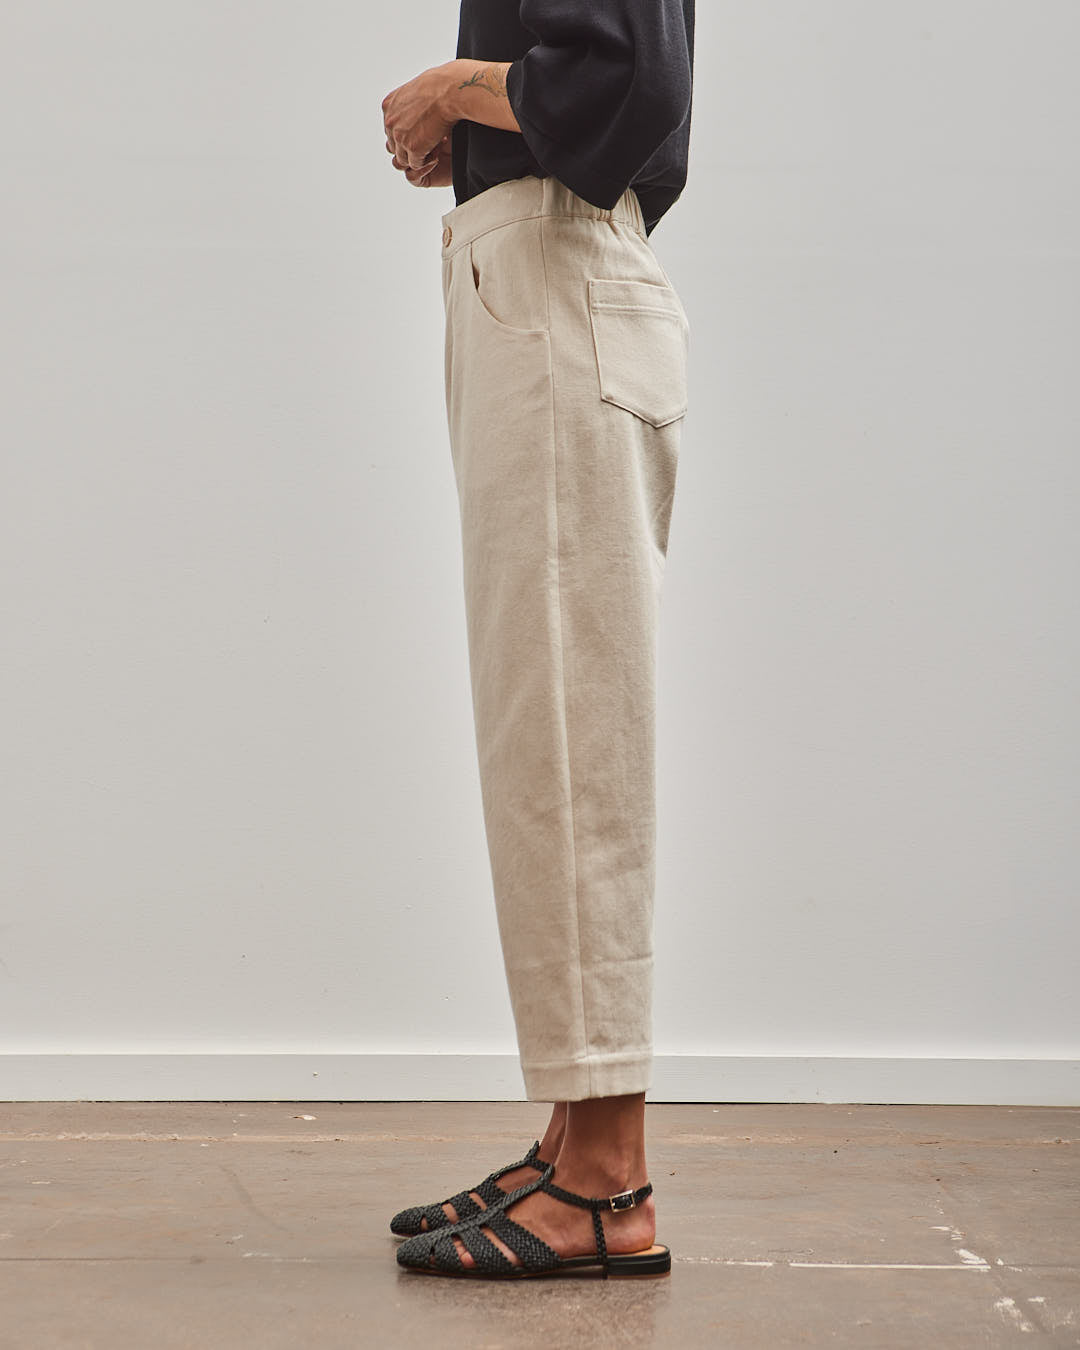 7115 Signature Curved Leg Trouser, Off-White